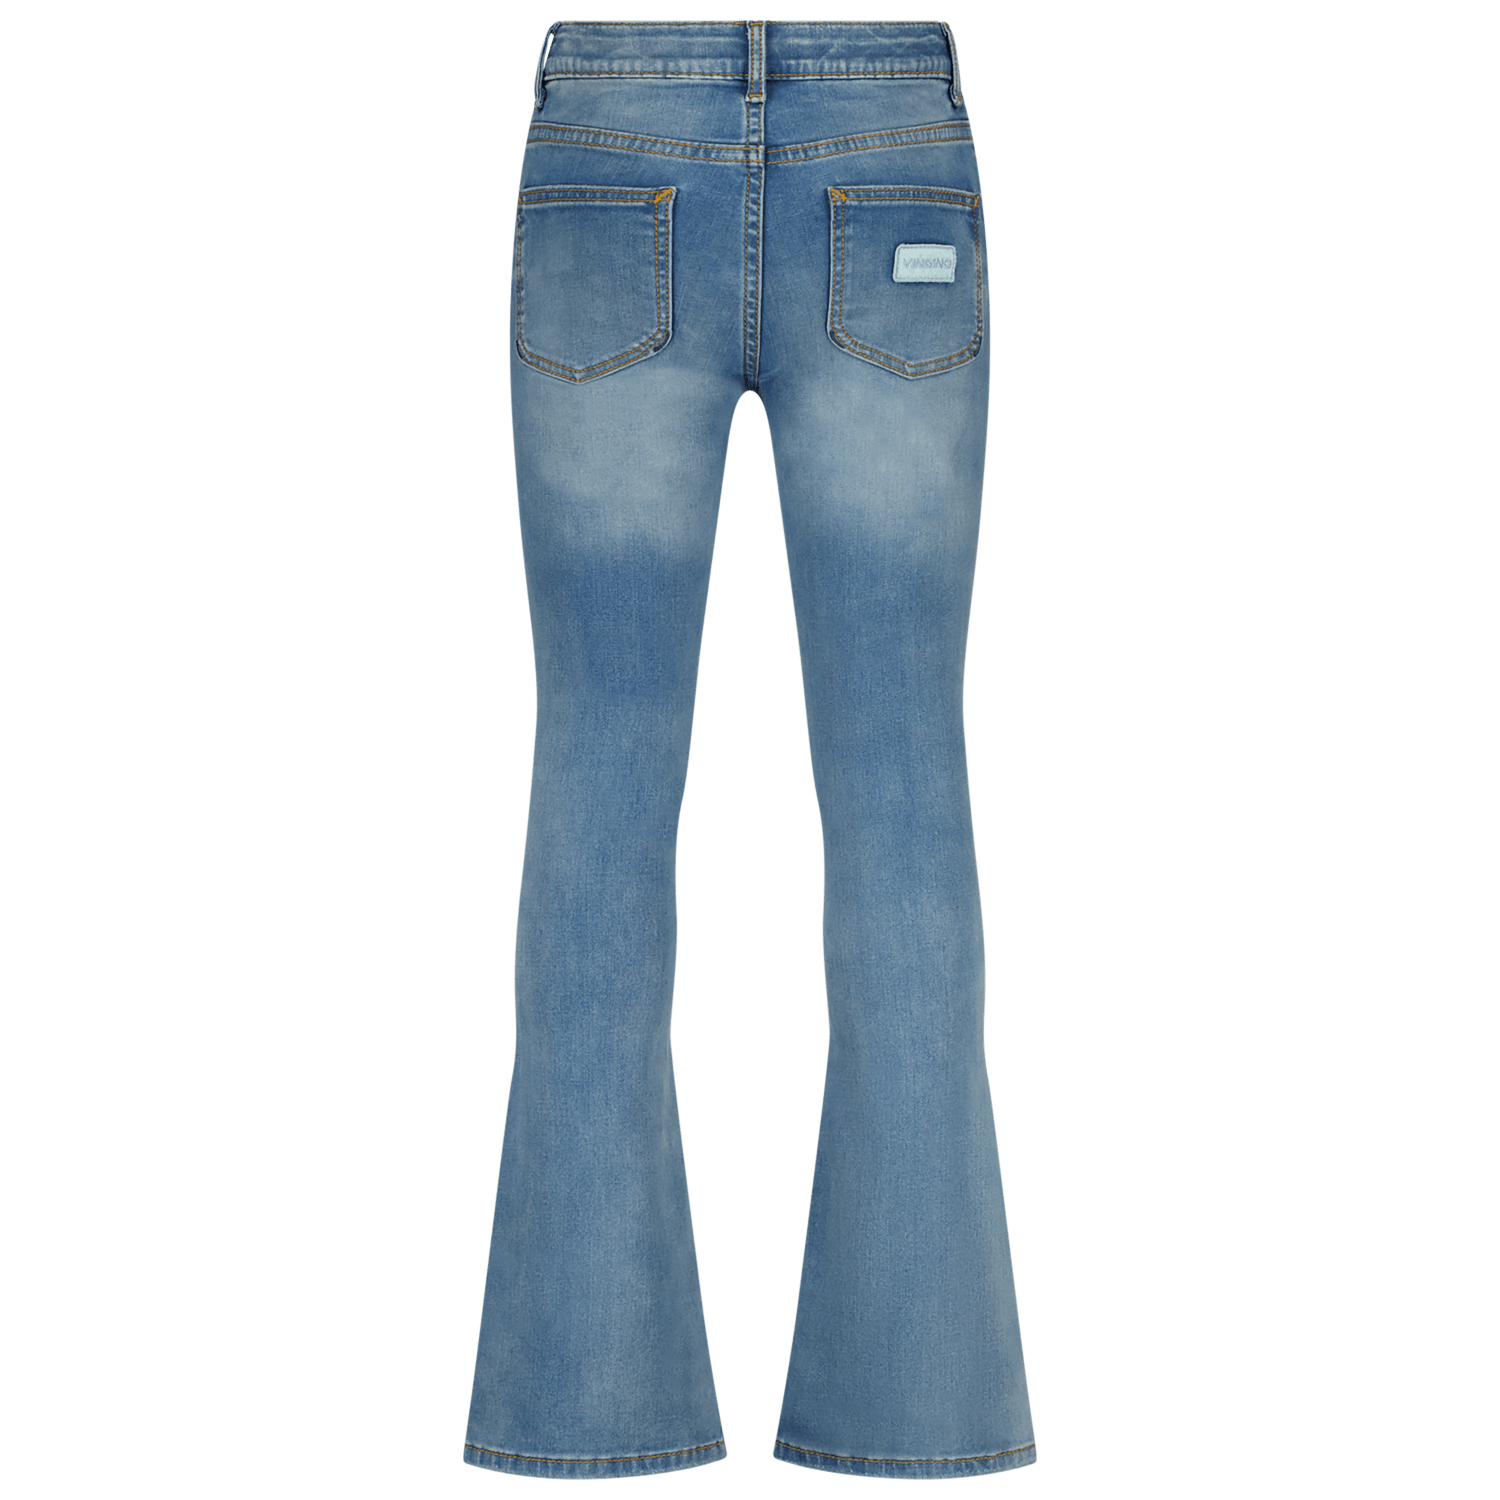 VINGINO Flare Jeans Britte patched on pockets